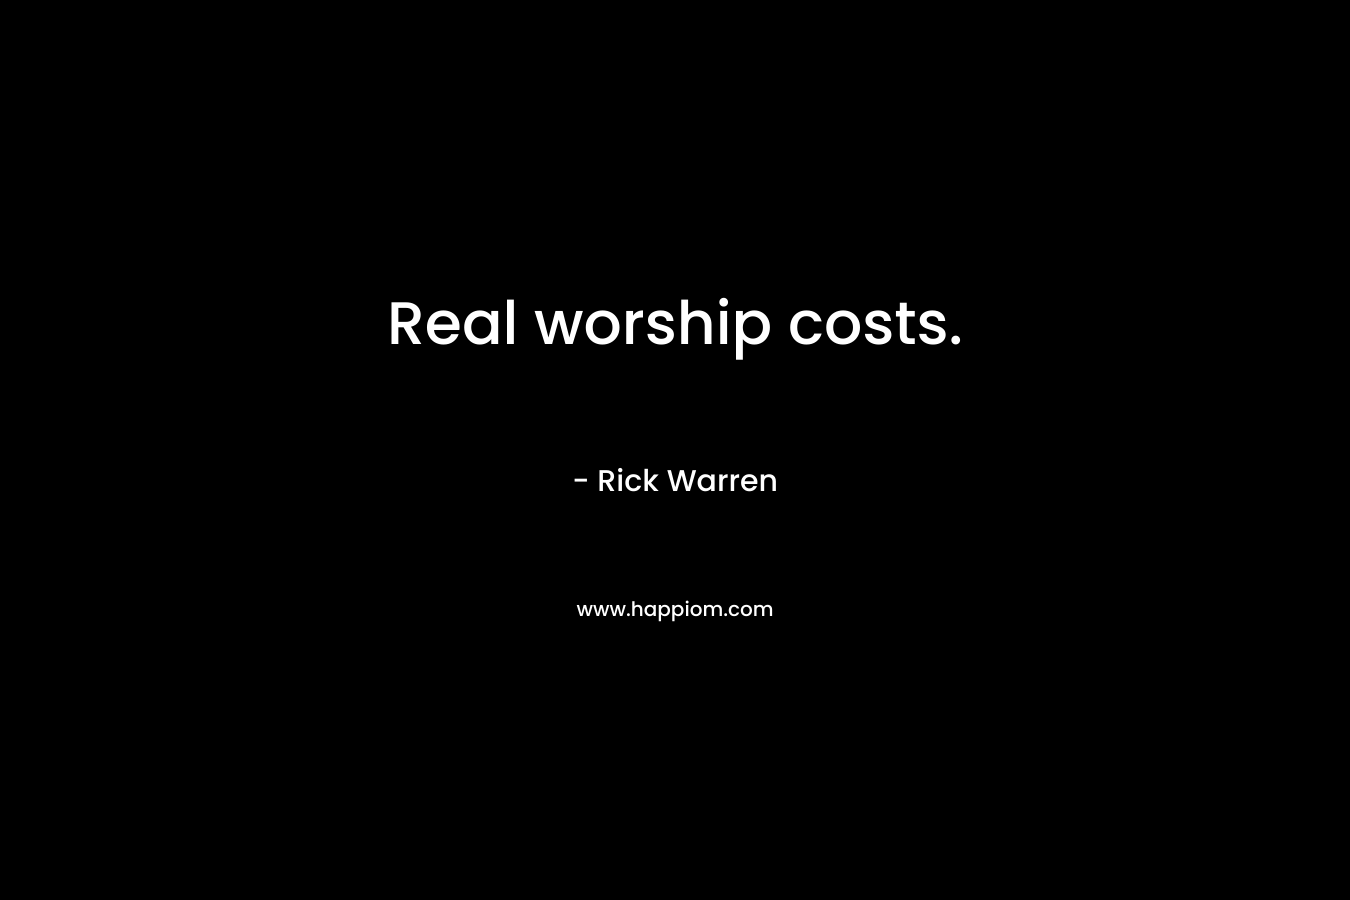 Real worship costs.